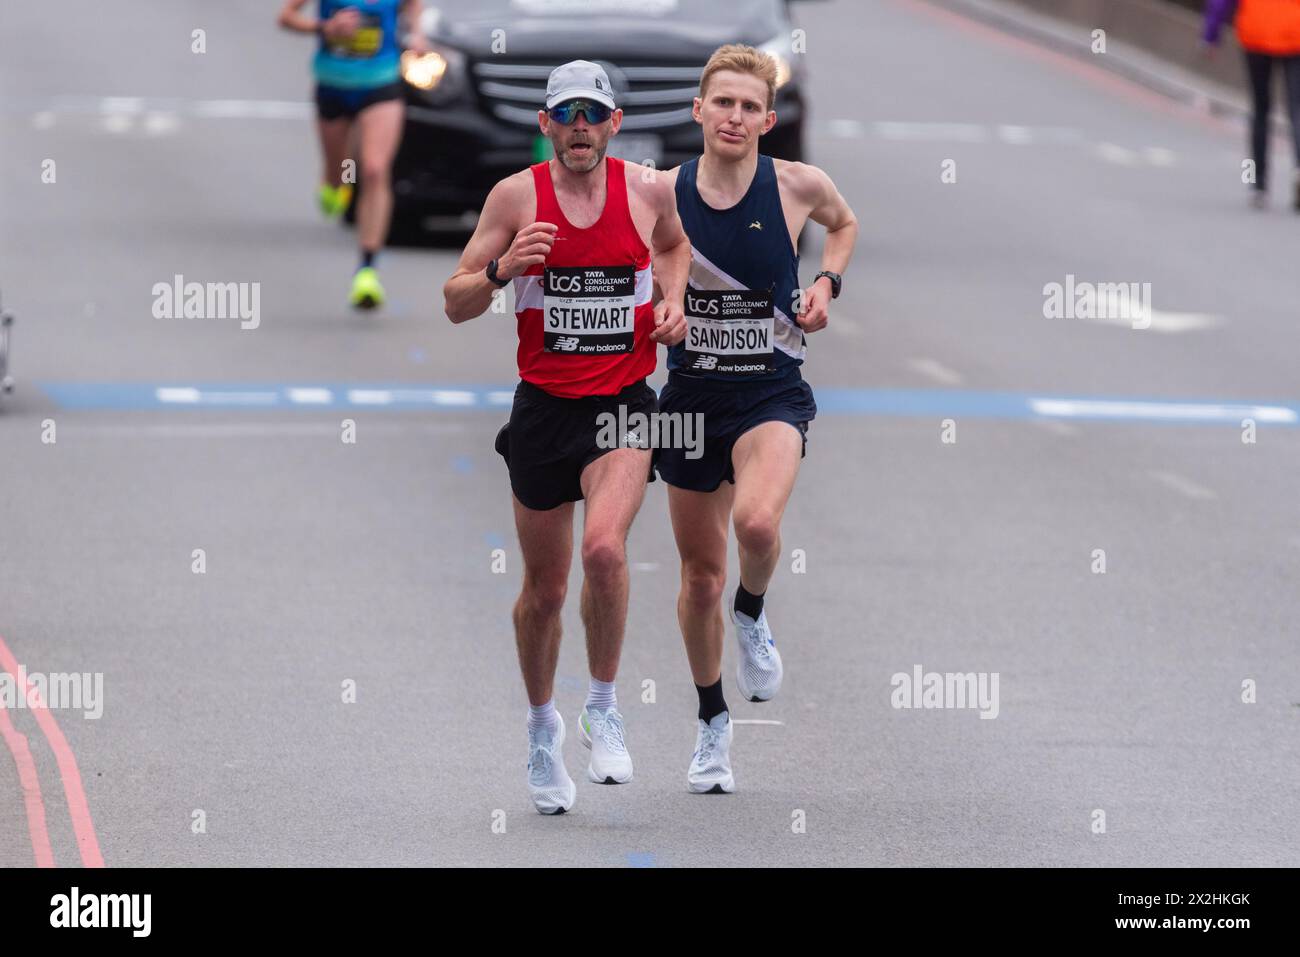 Fraser Stewart & Charlie Sandison competing in the TCS London Marathon 2024 passing through Tower Hill, London, UK. Stock Photo